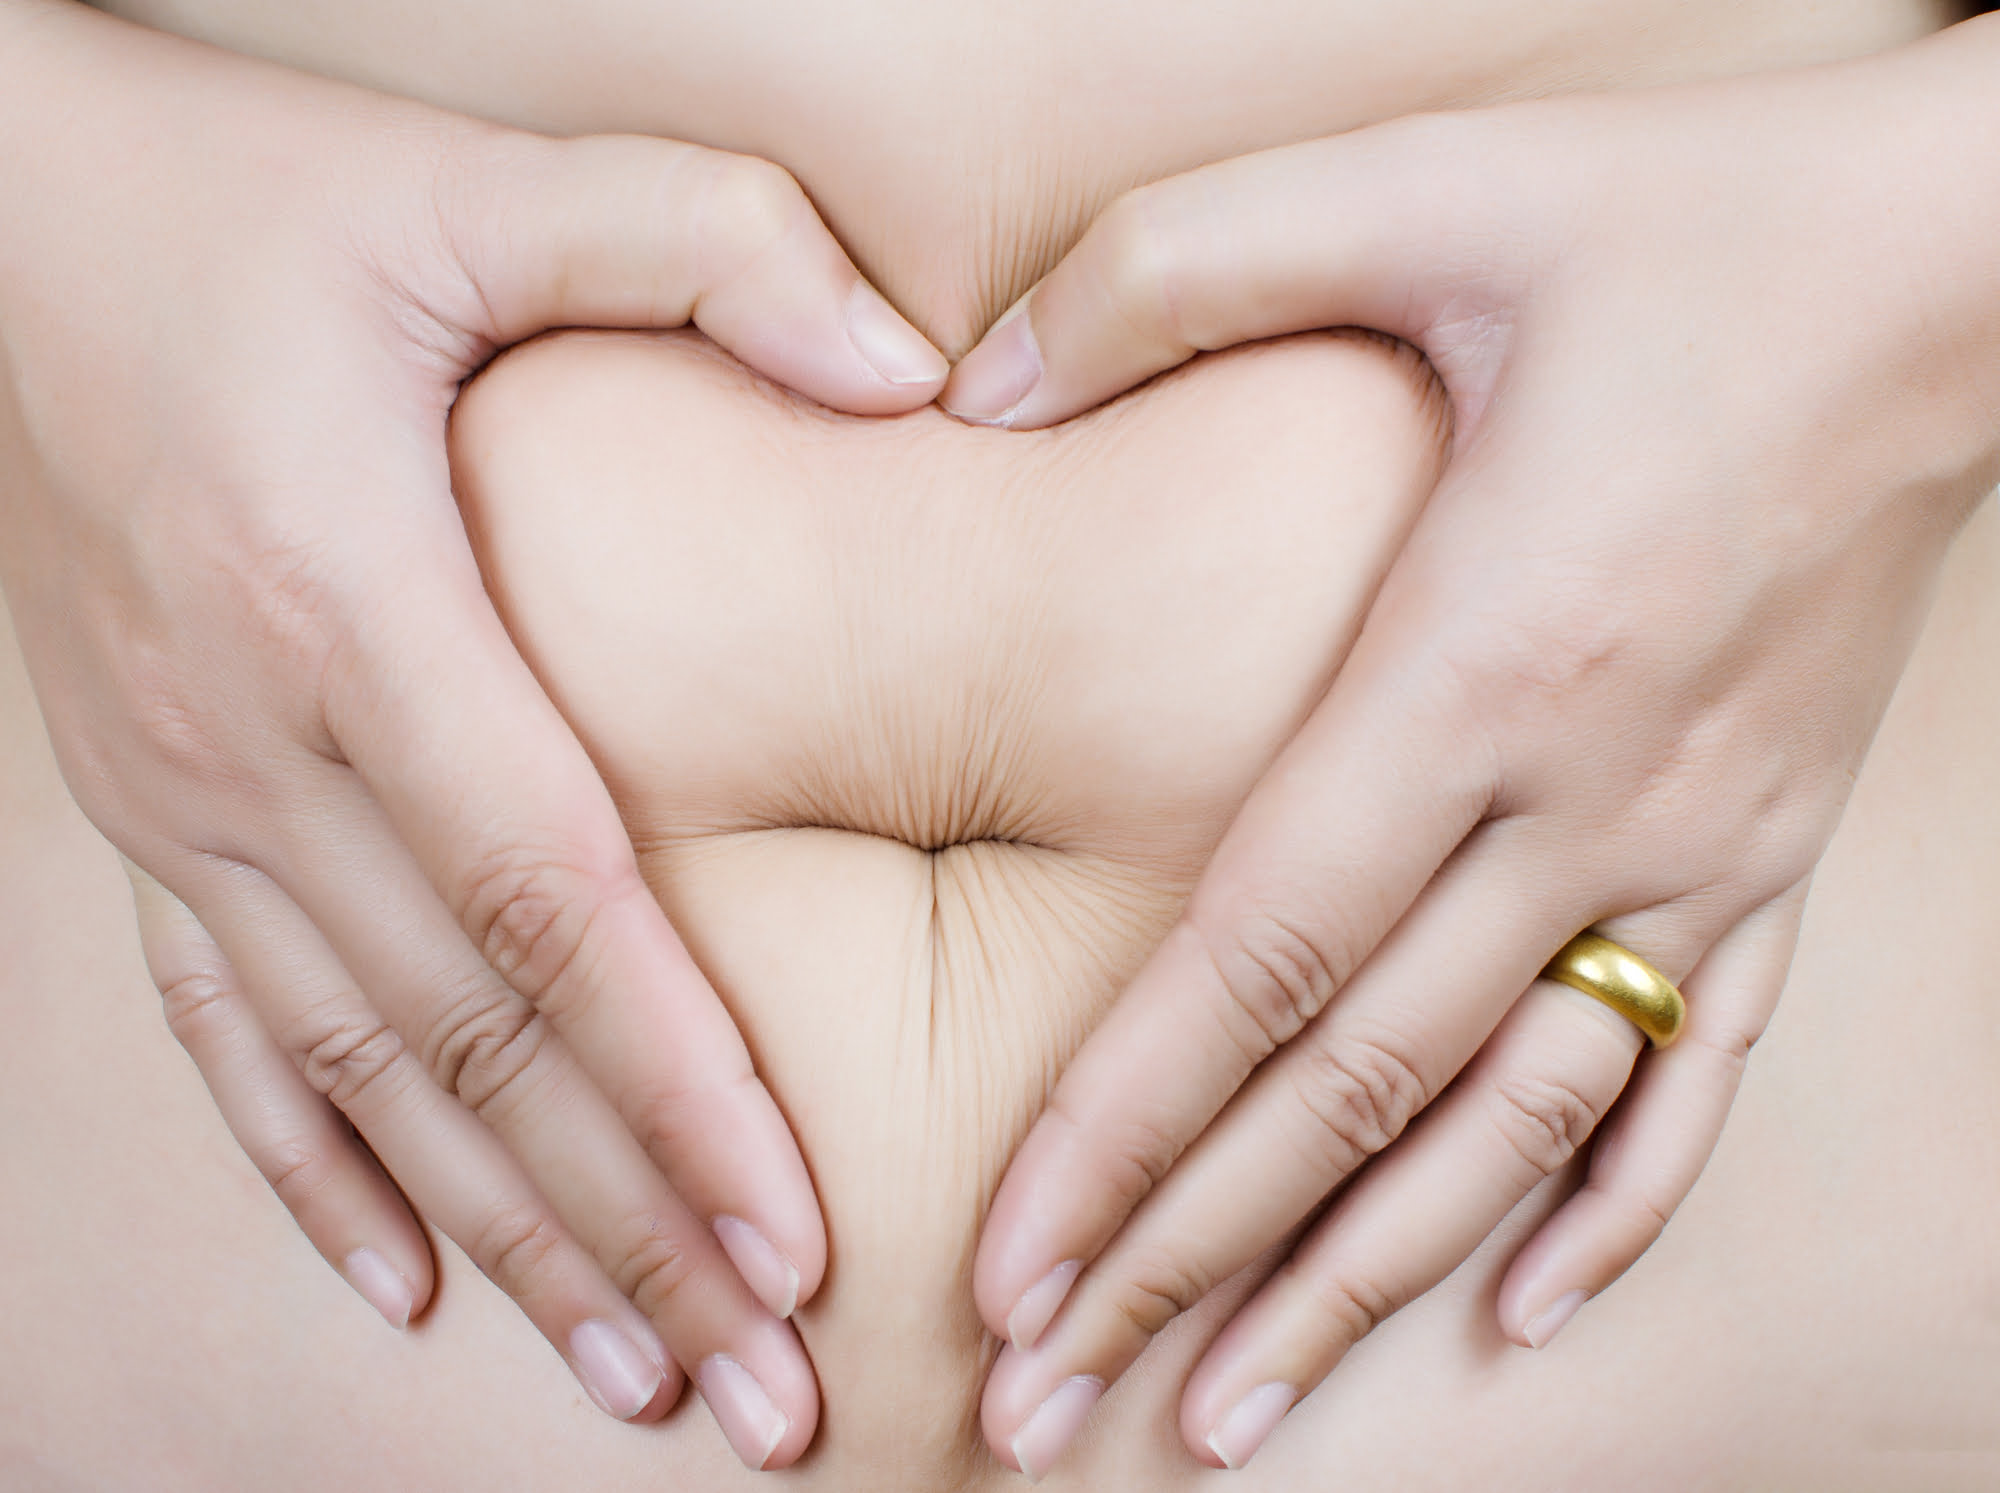 woman making heart out of hands on belly